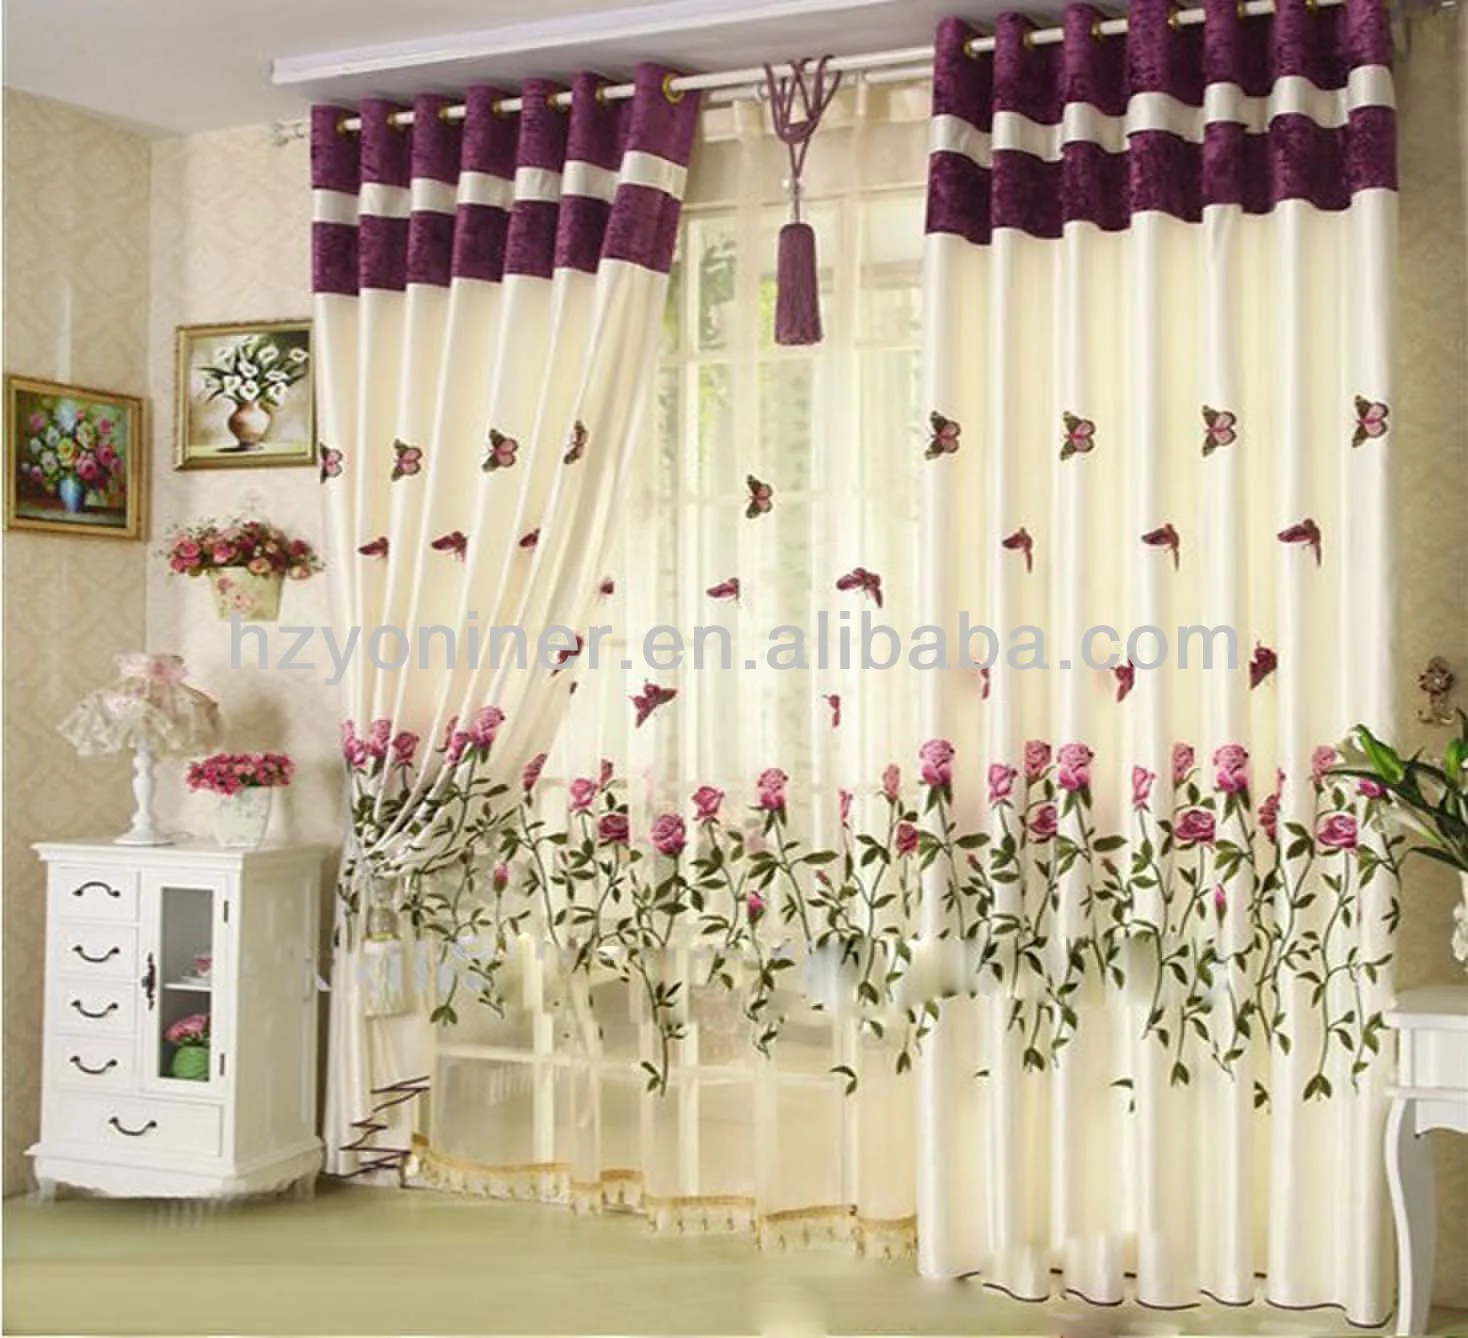 Morden And Fancy Curtains With Embroidery Buy Curtain With Nice Embroidery